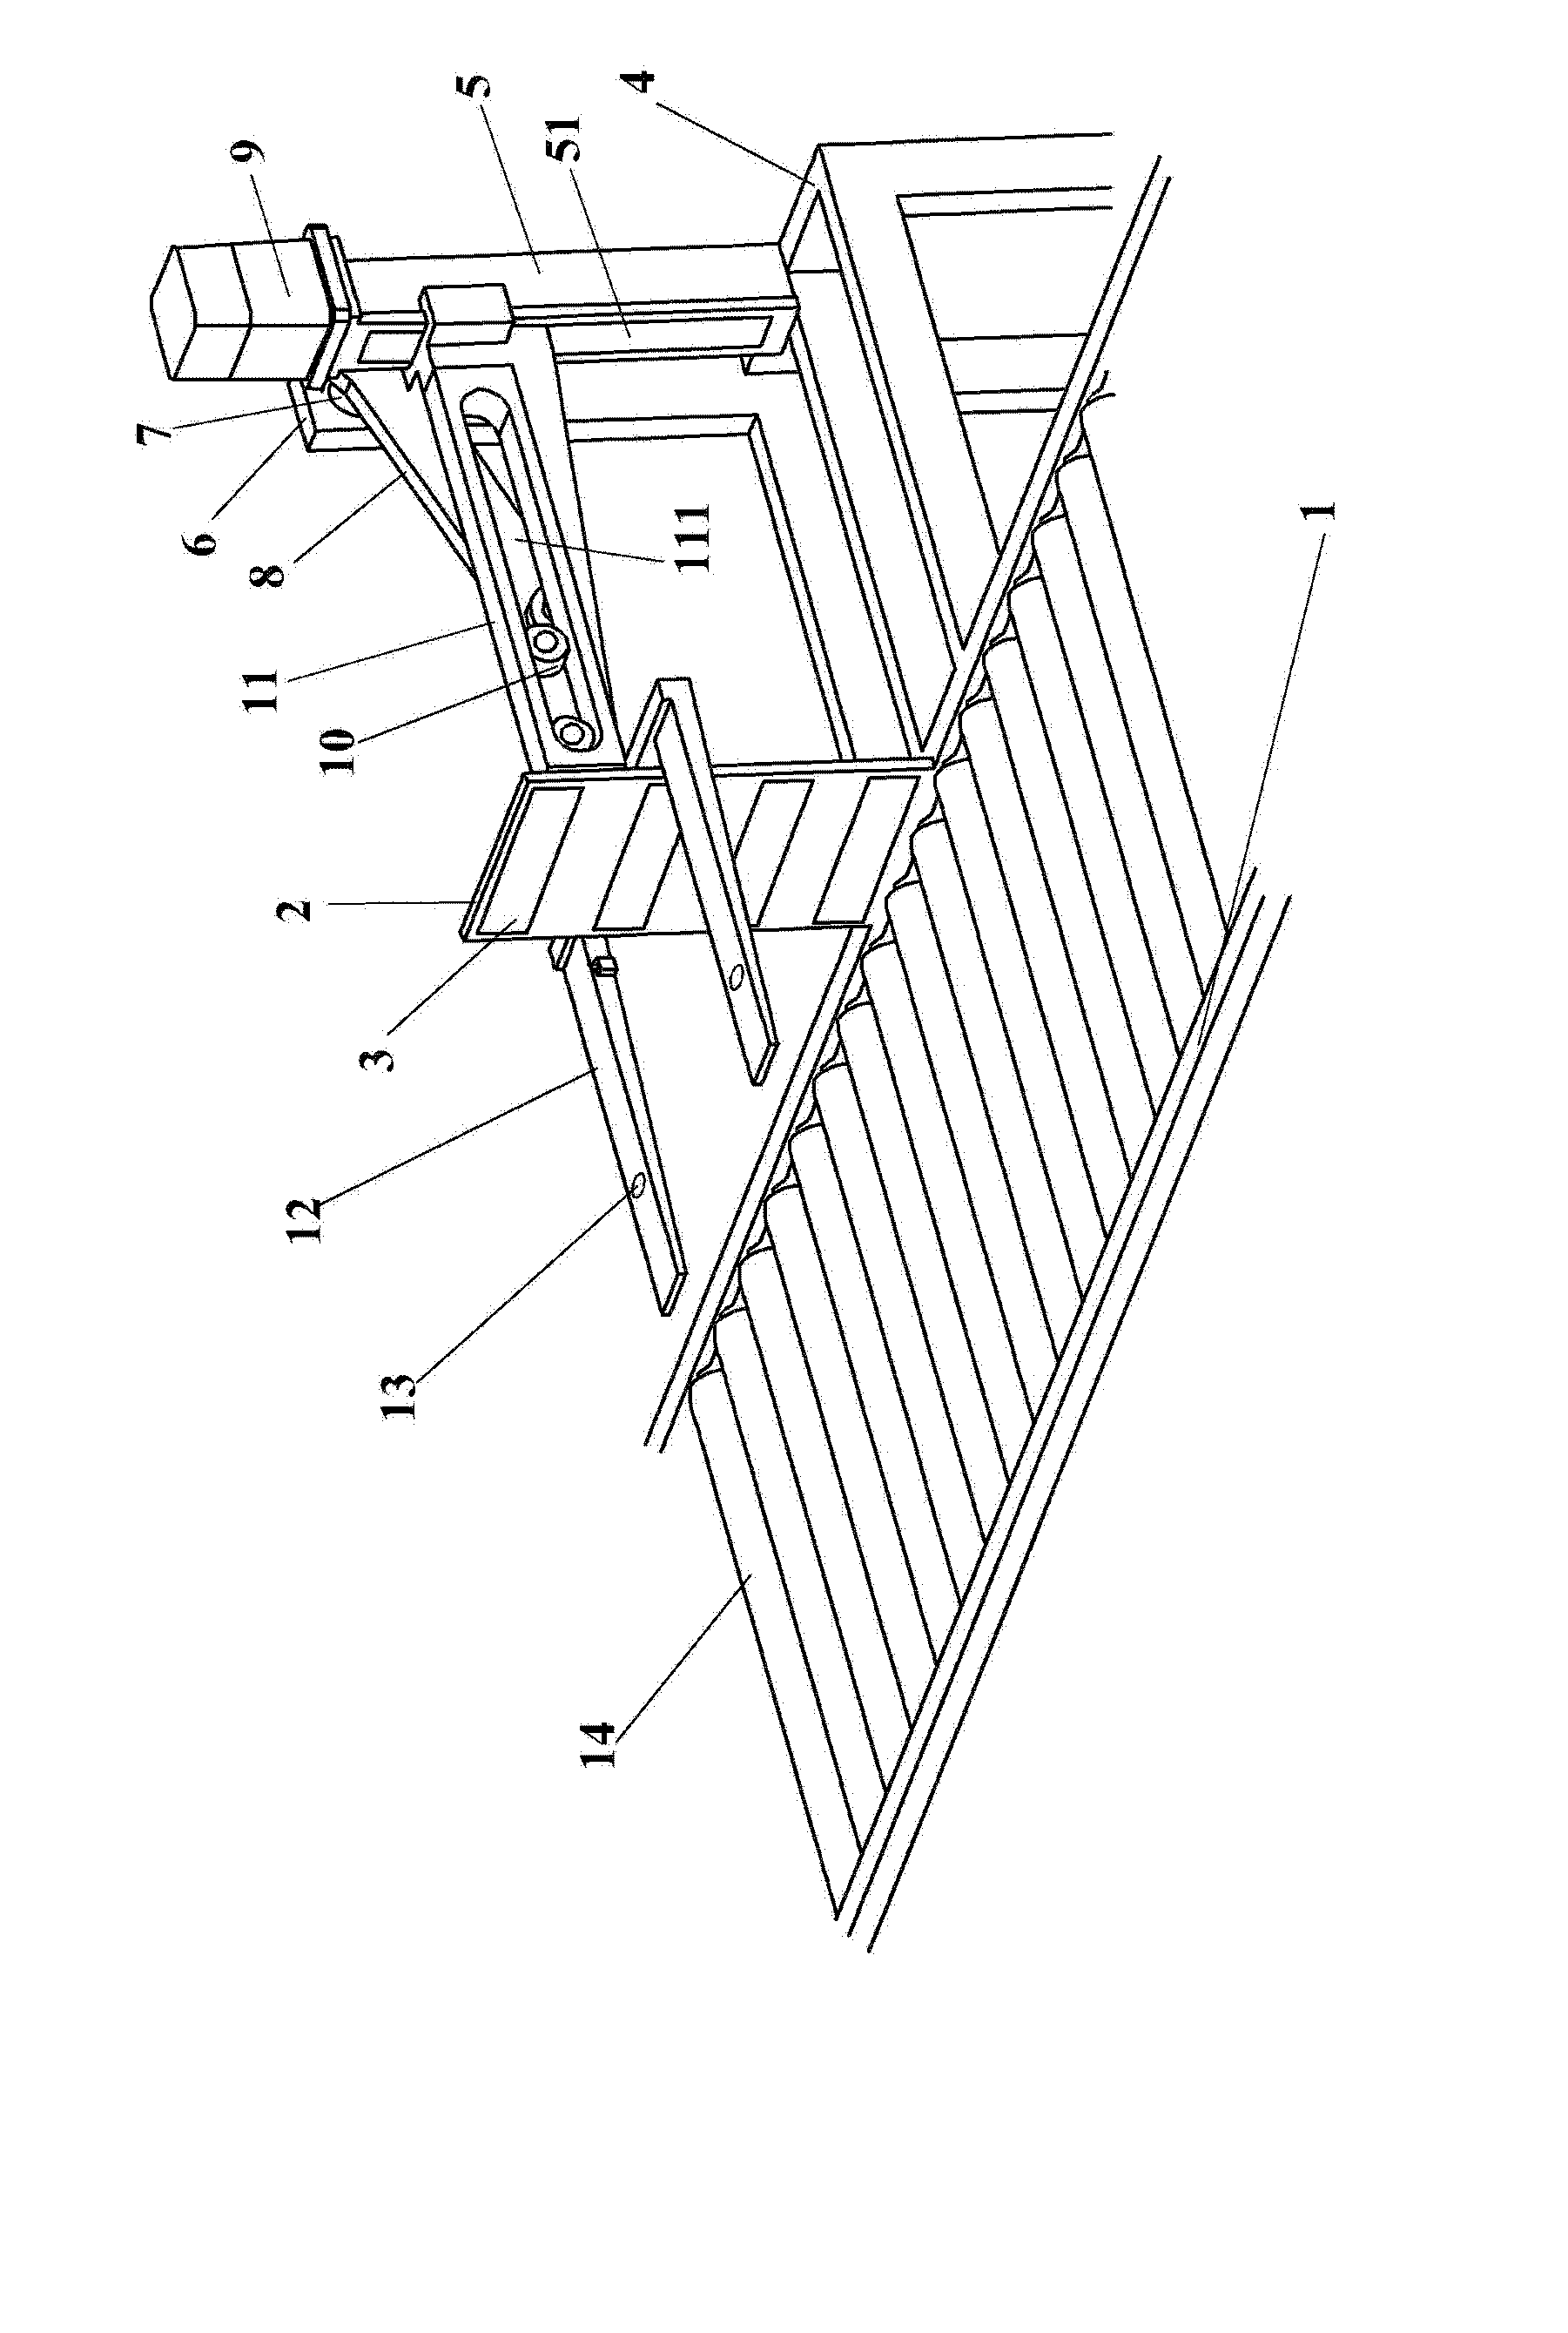 Cargo sorting device with card reader on baffle